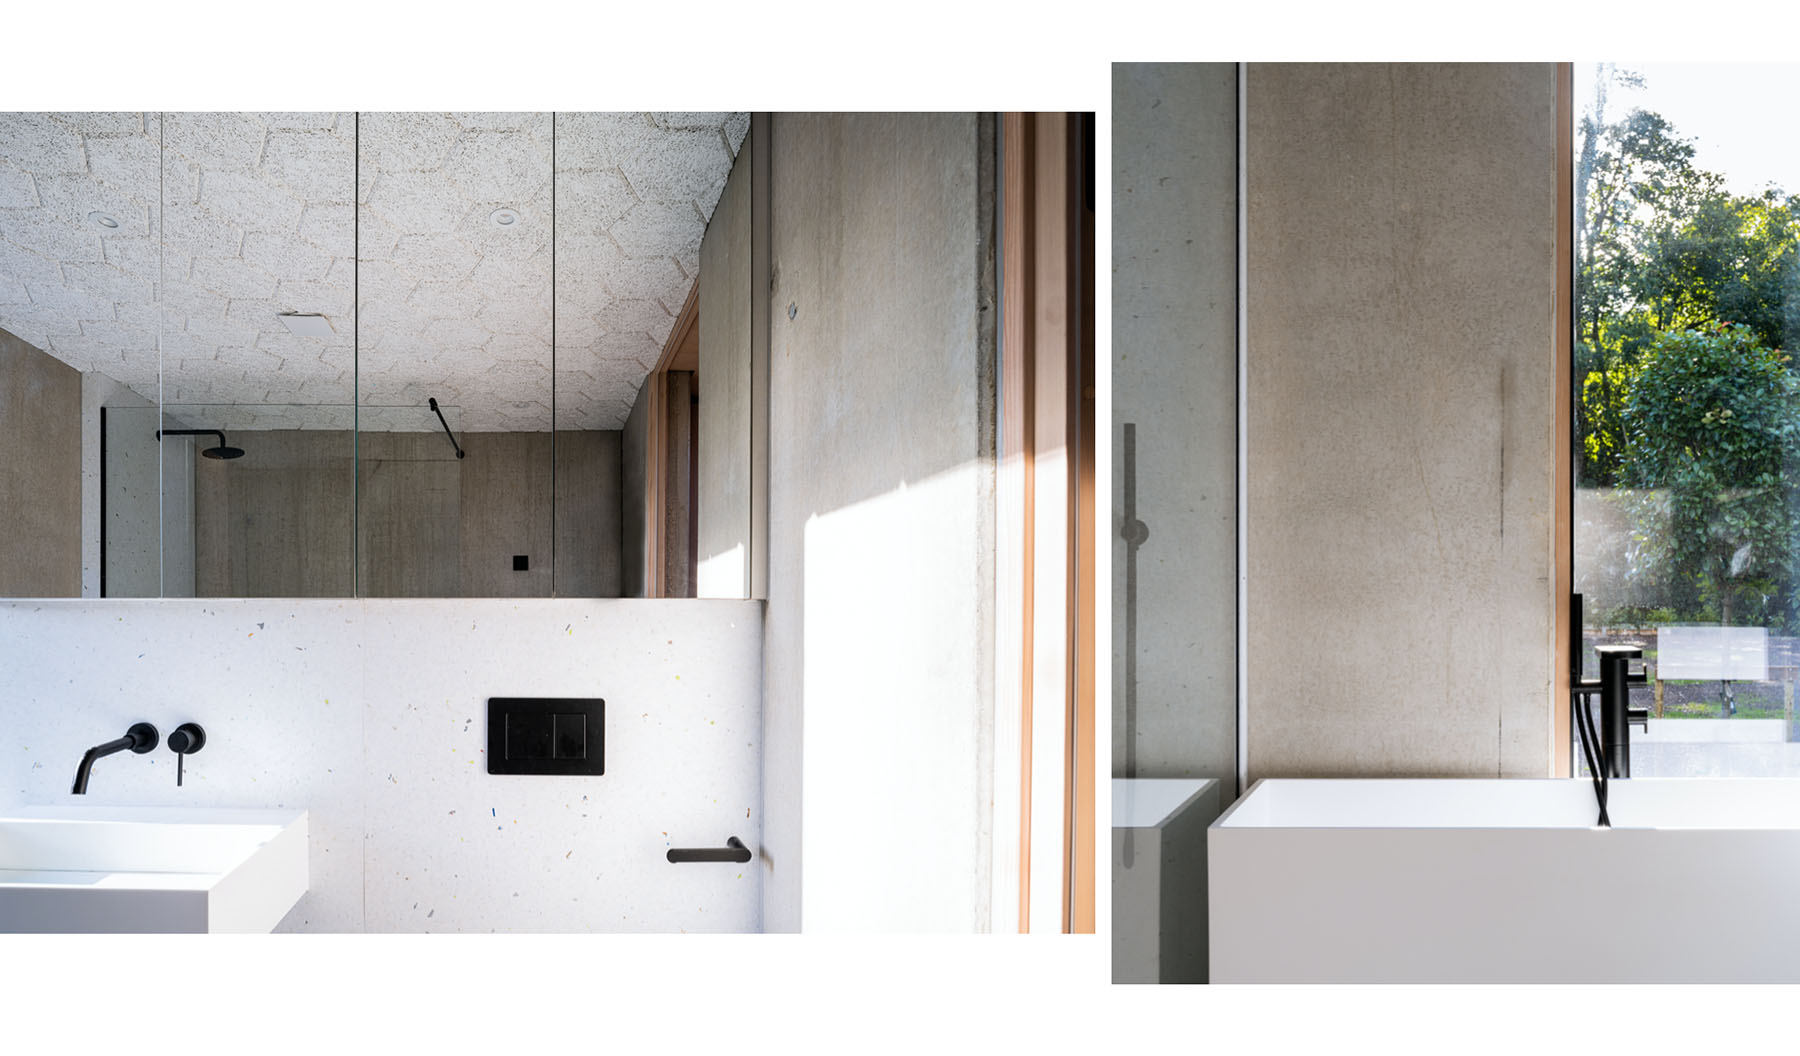 Credit: The Beeches Bathroom, Photographer: Fred Howarth. Material: Alba.